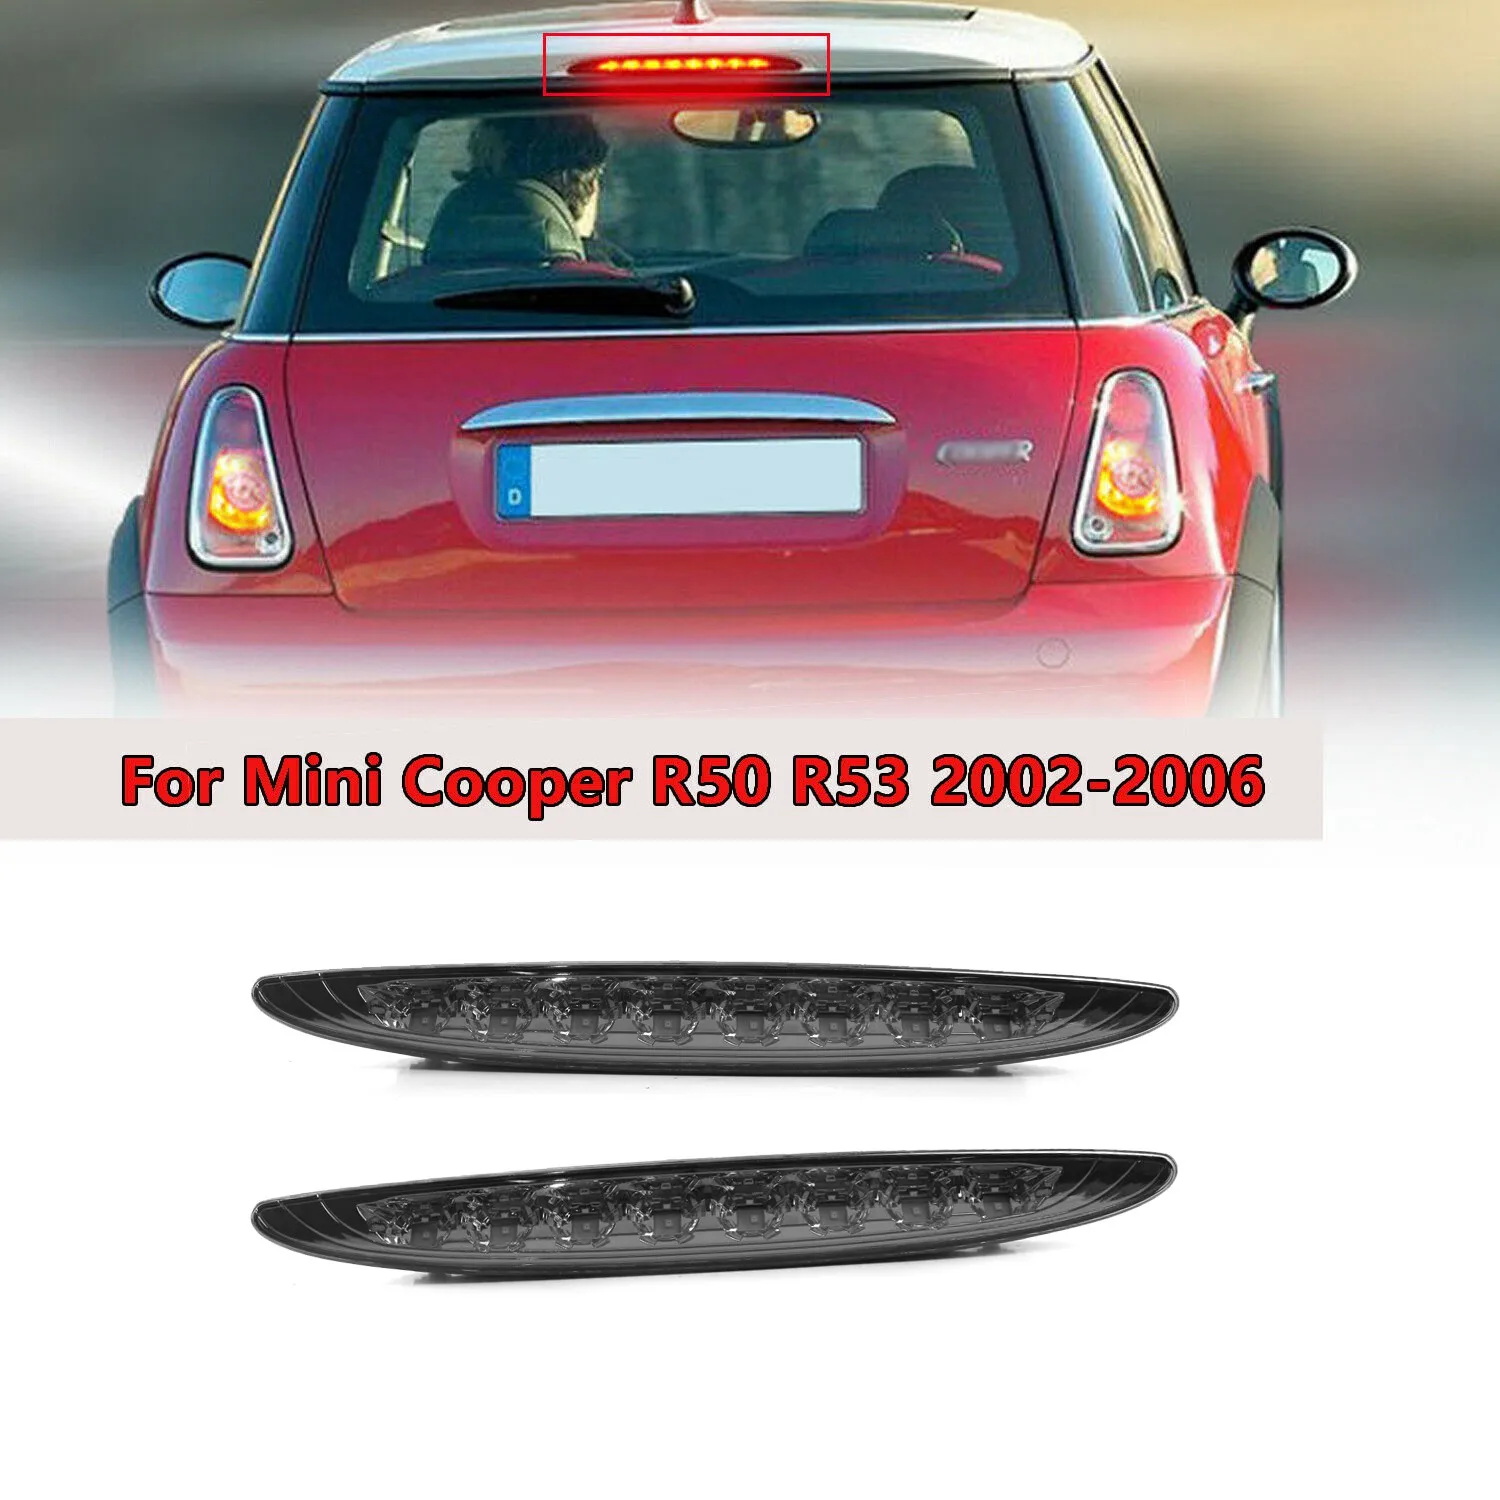 Smoked Lens Red LED 3Rd Brake Lamp for 02-06 MINI Cooper R50 R53 1St Gen High Mount Light 63256935789 | Автомобили и мотоциклы